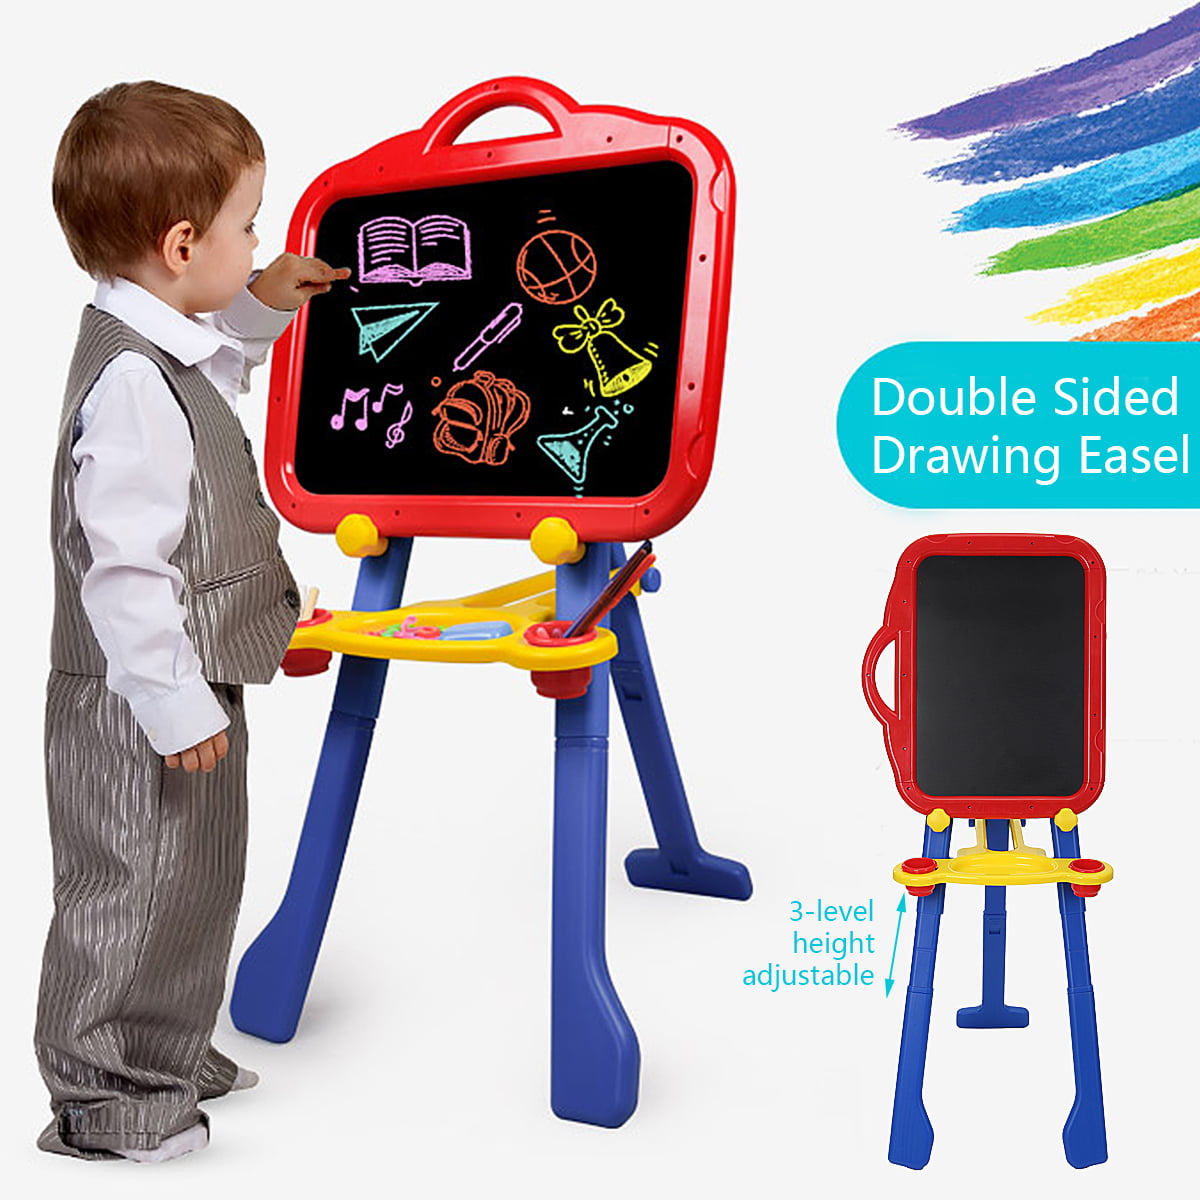 Liusin Kids Art Easel Adjustable Height Double-Sided Magnetic Whiteboard & Chalkboard Standing Easel Kids Painting and Drawing Board with Bottom Tray for Kid Tollder Children Learning